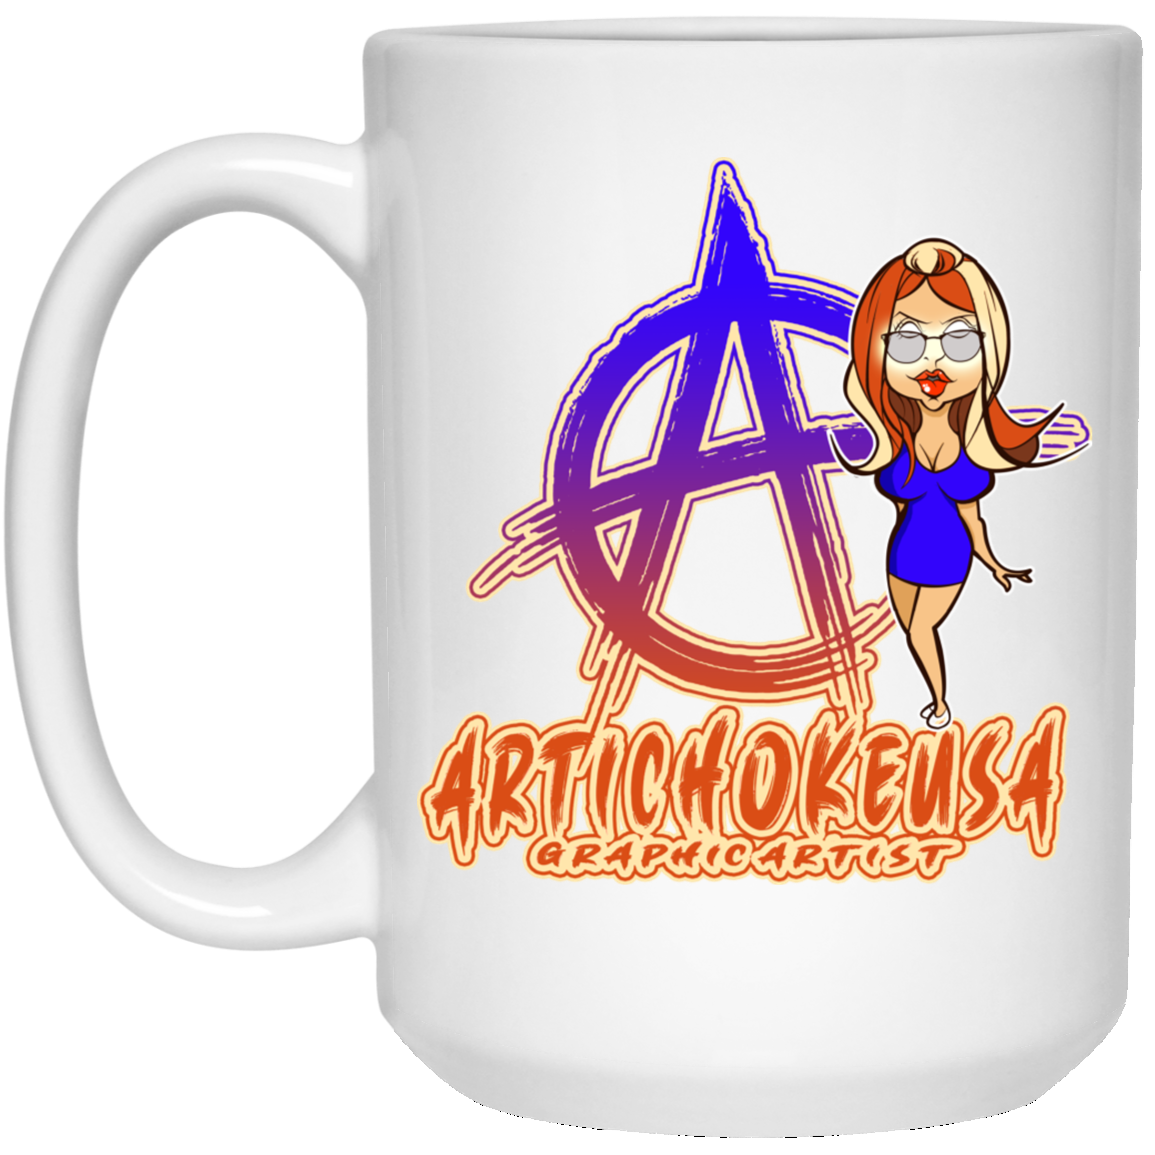 ArtichokeUSA Character and Font Design #2. Friends, Clients, and People of Earth. 15 oz. White Mug